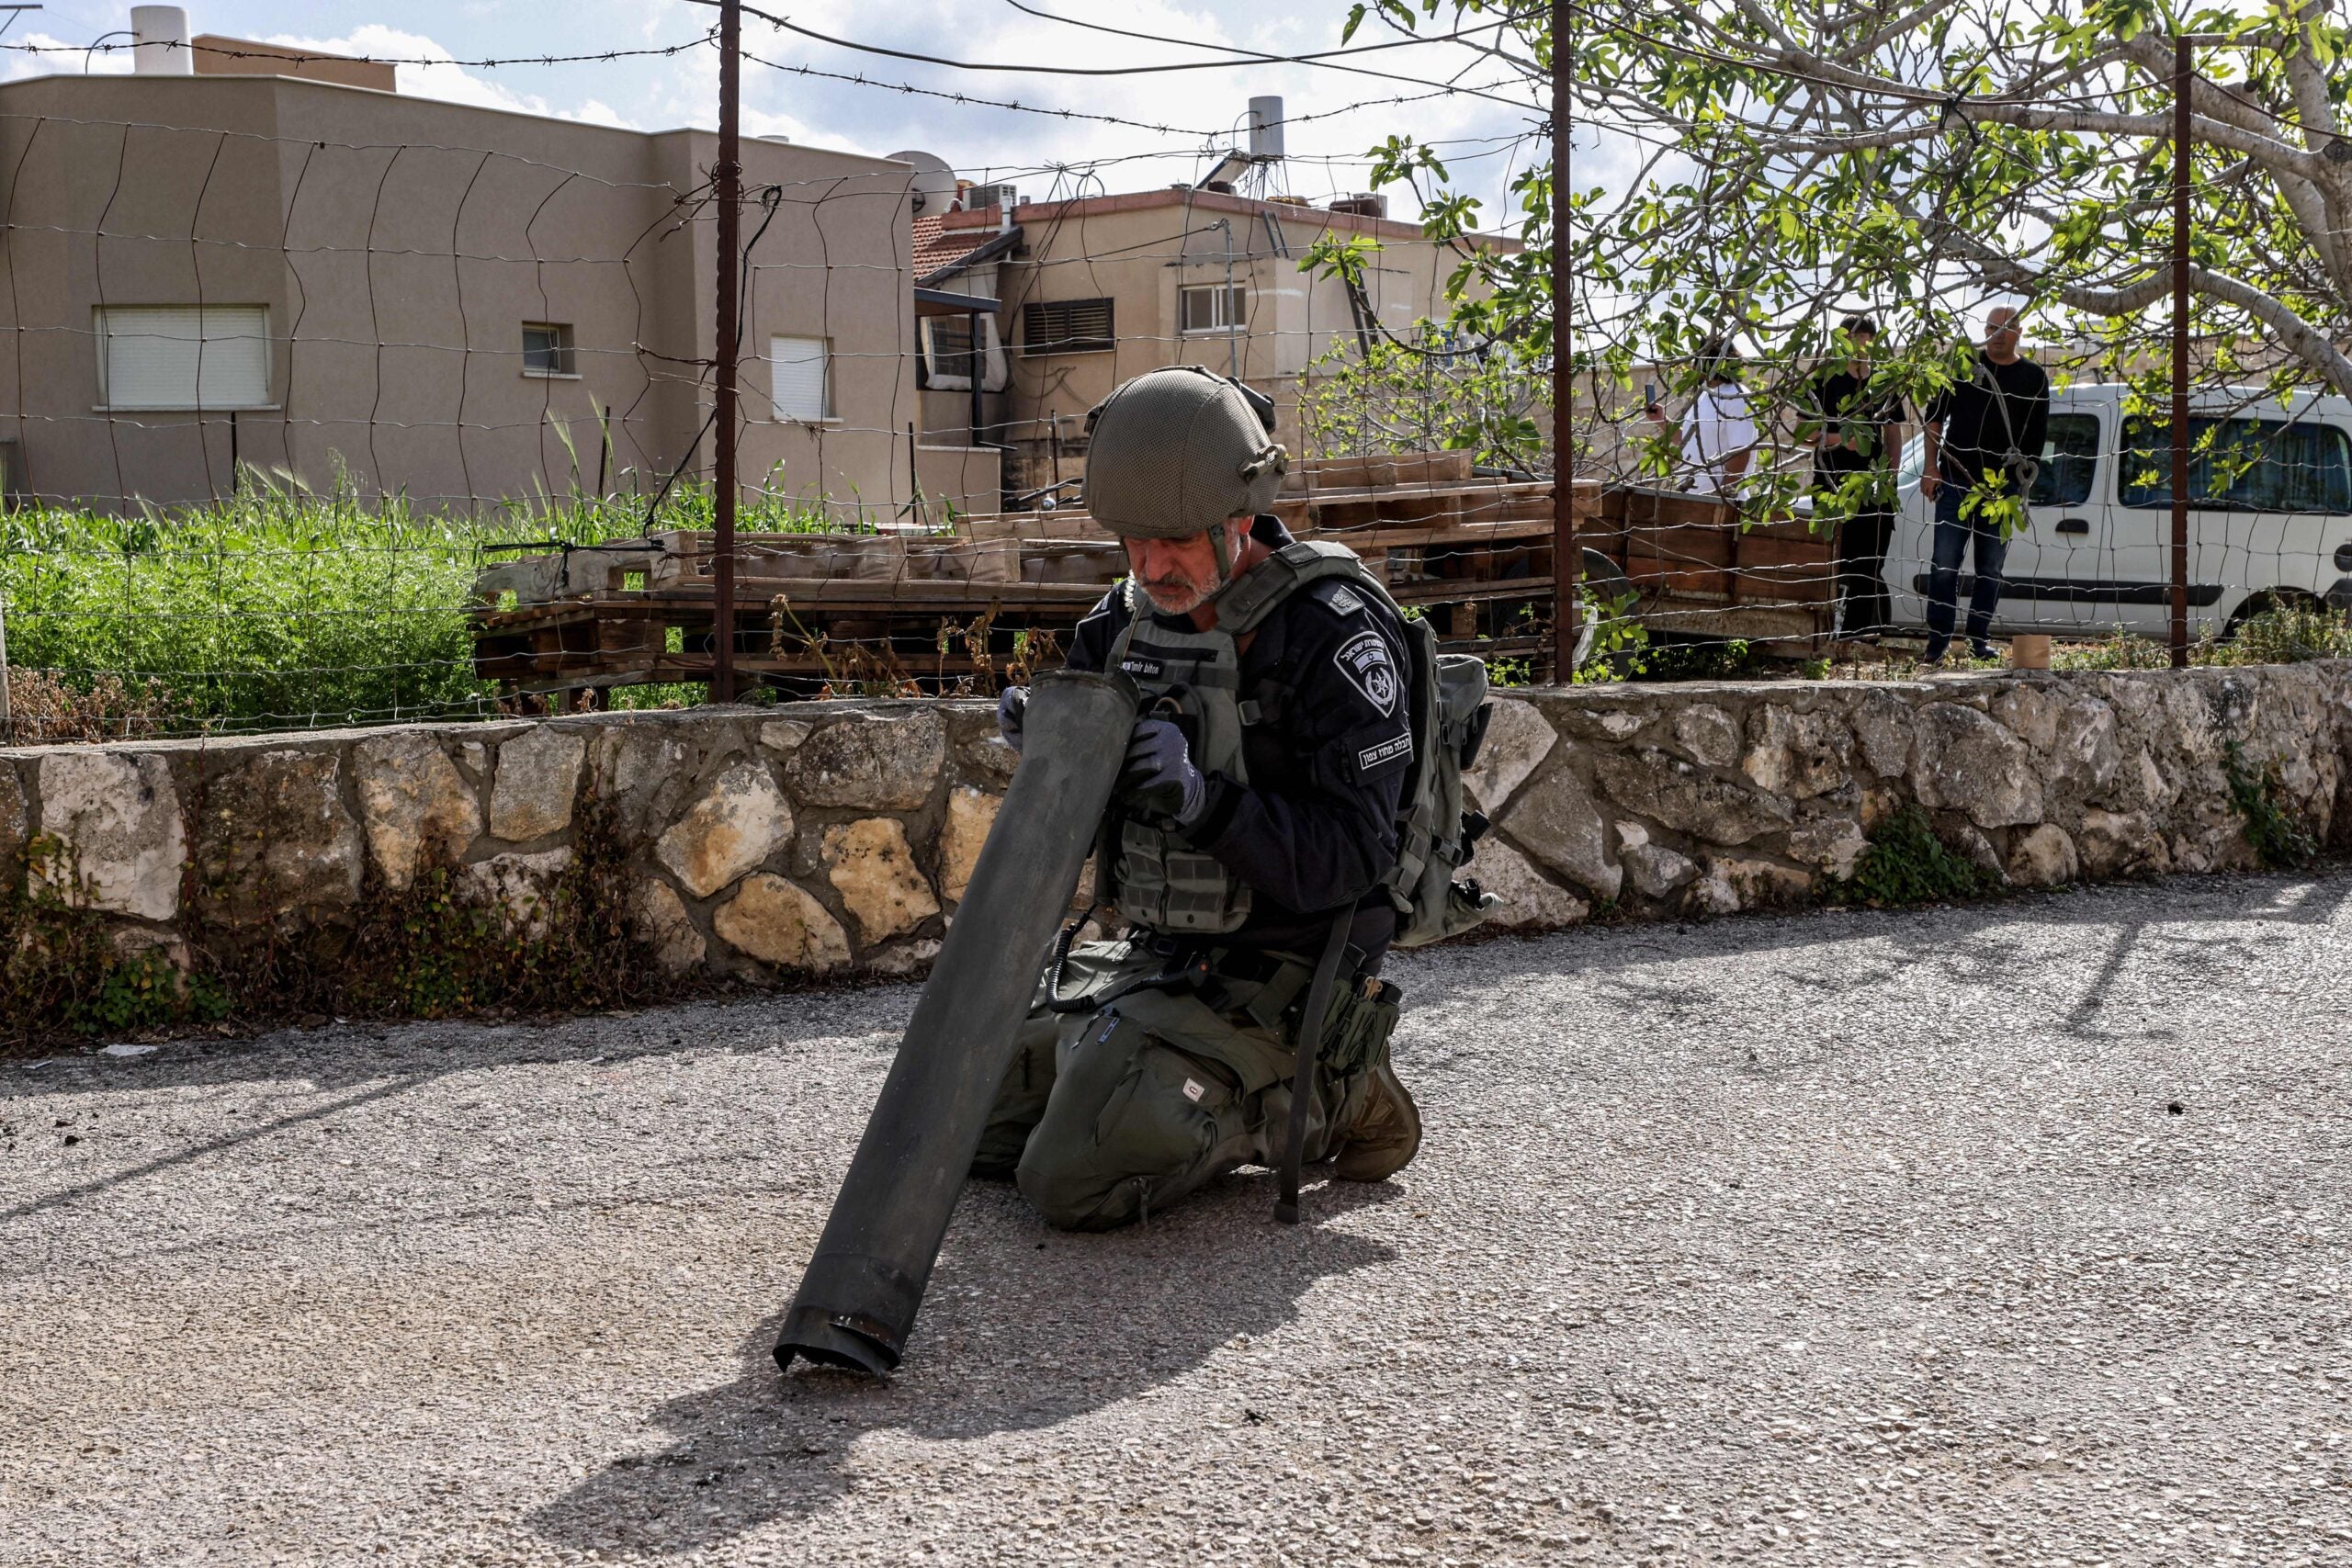 An Israeli police bomb disposal unit member inspects the remains of a shell fired from Lebanon on Israel in its northern town of Fassuta on April 6, 2023. - The Israeli army said it intercepted rocket fire from Lebanon on April 6 after clashes between Israeli police and Palestinians inside Islam's third-holiest site drew warnings of retaliation from around the region. (Photo by Jalaa MAREY / AFP) (Photo by JALAA MAREY/AFP via Getty Images)